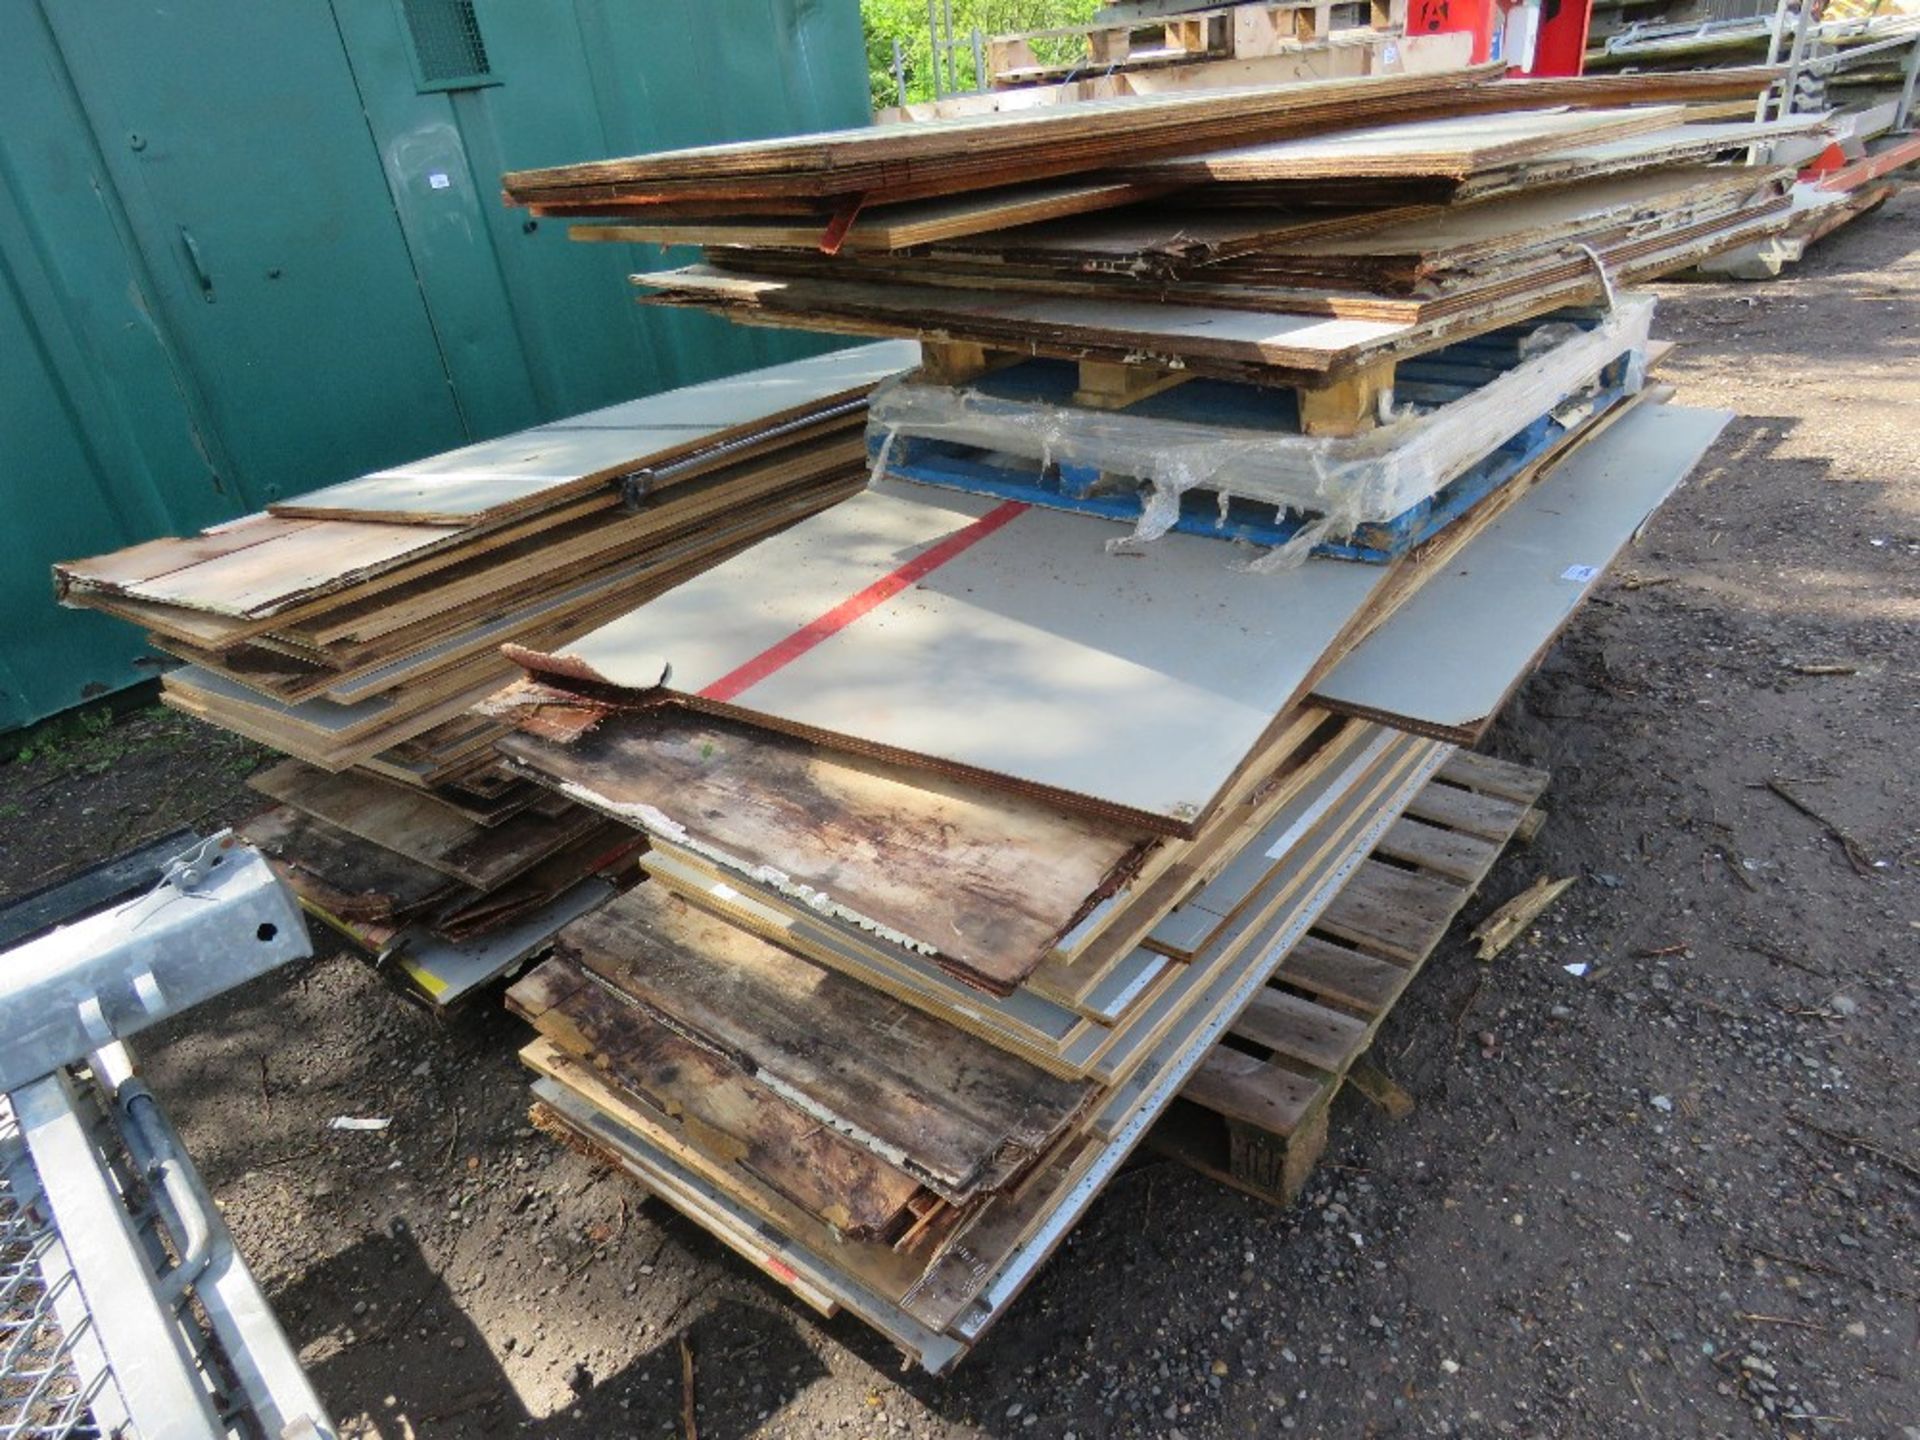 3 X PALLETS CONTAINING A LARGE QUANTITY OF PLYWOOD SHEETS/OFFCUTS. THIS LOT IS SOLD UNDER THE AUC